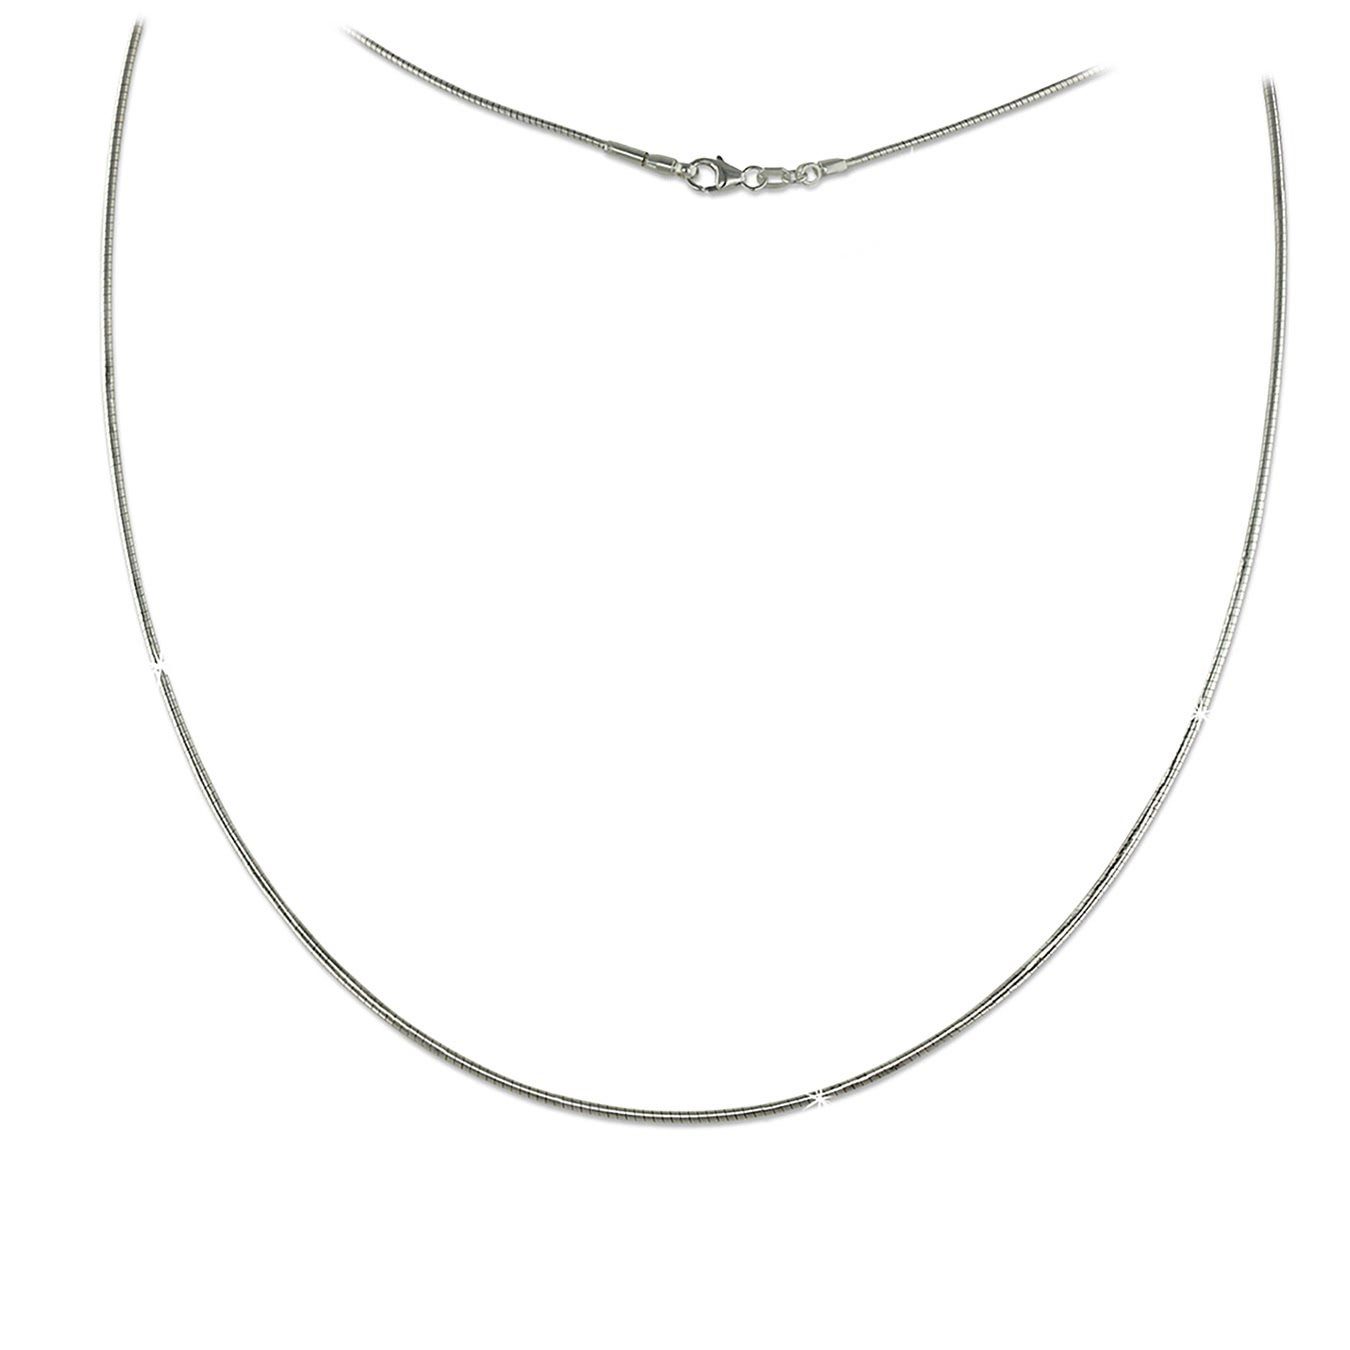 SilberDream Collier SilberDream Damen Collier 925 Silber, Colliers ca. 45cm, 925 Sterling Silber, Farbe: silber, Made-In Germany